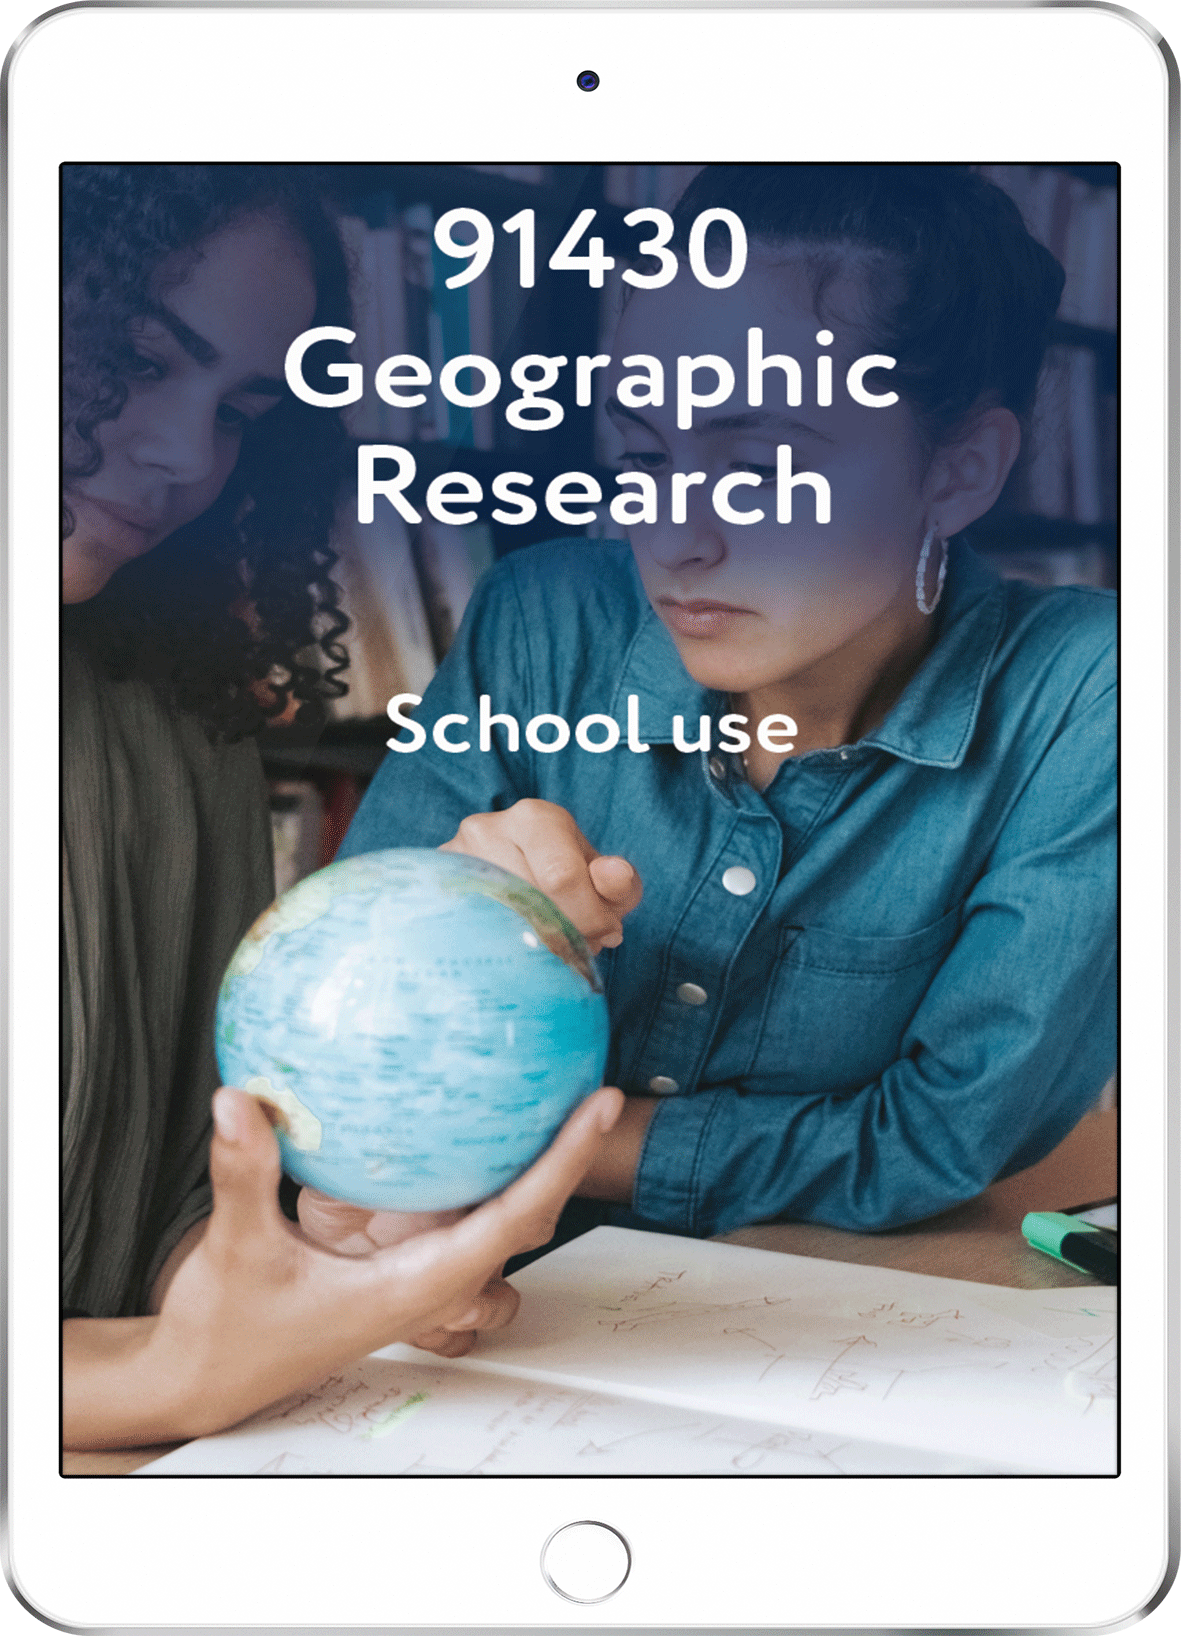 91430 Geographic Research - School Use